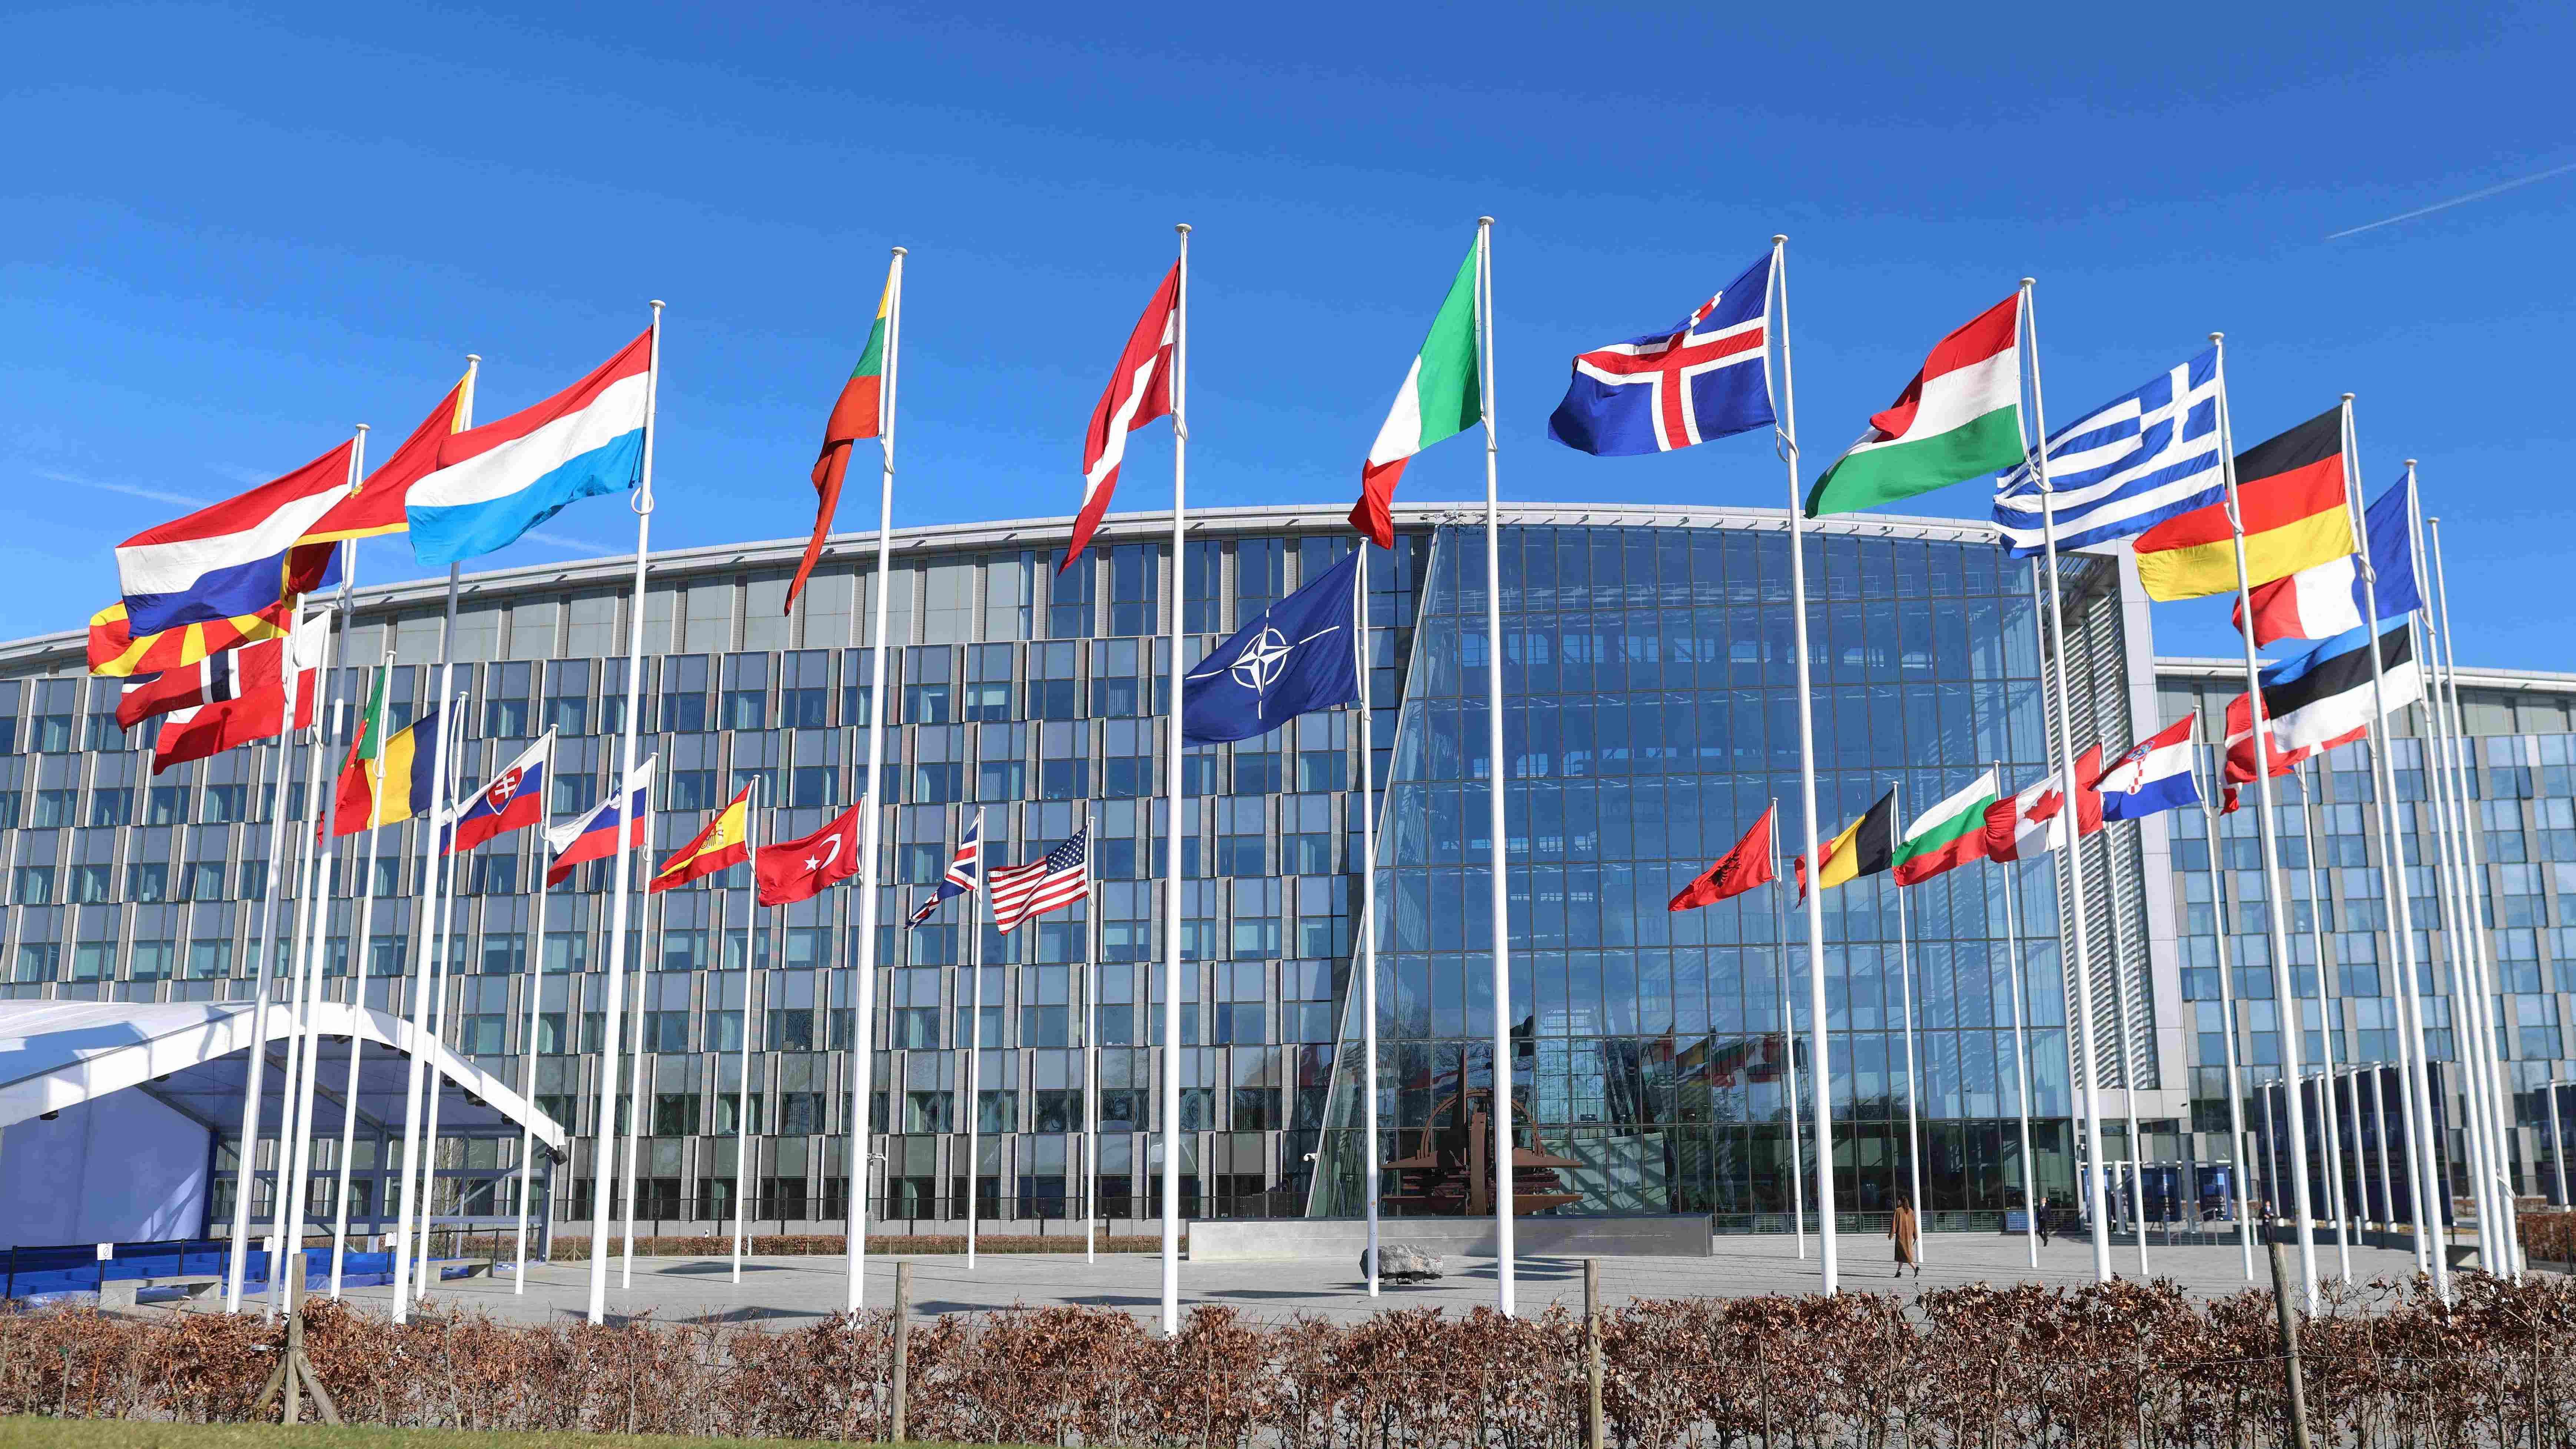 A photo shows member country flags with one empty mast ahead of a flag-raising ceremony for Finland's accession to NATO, in the Cour d'Honneur of the NATO headquarters in Brussels, on April 4, 2023. - Finland becomes the 31st member of NATO on April 4, in a historic strategic shift provoked by Moscow's war on Ukraine, which doubles the US-led alliance's border with Russia.  Credit: AFP Photo